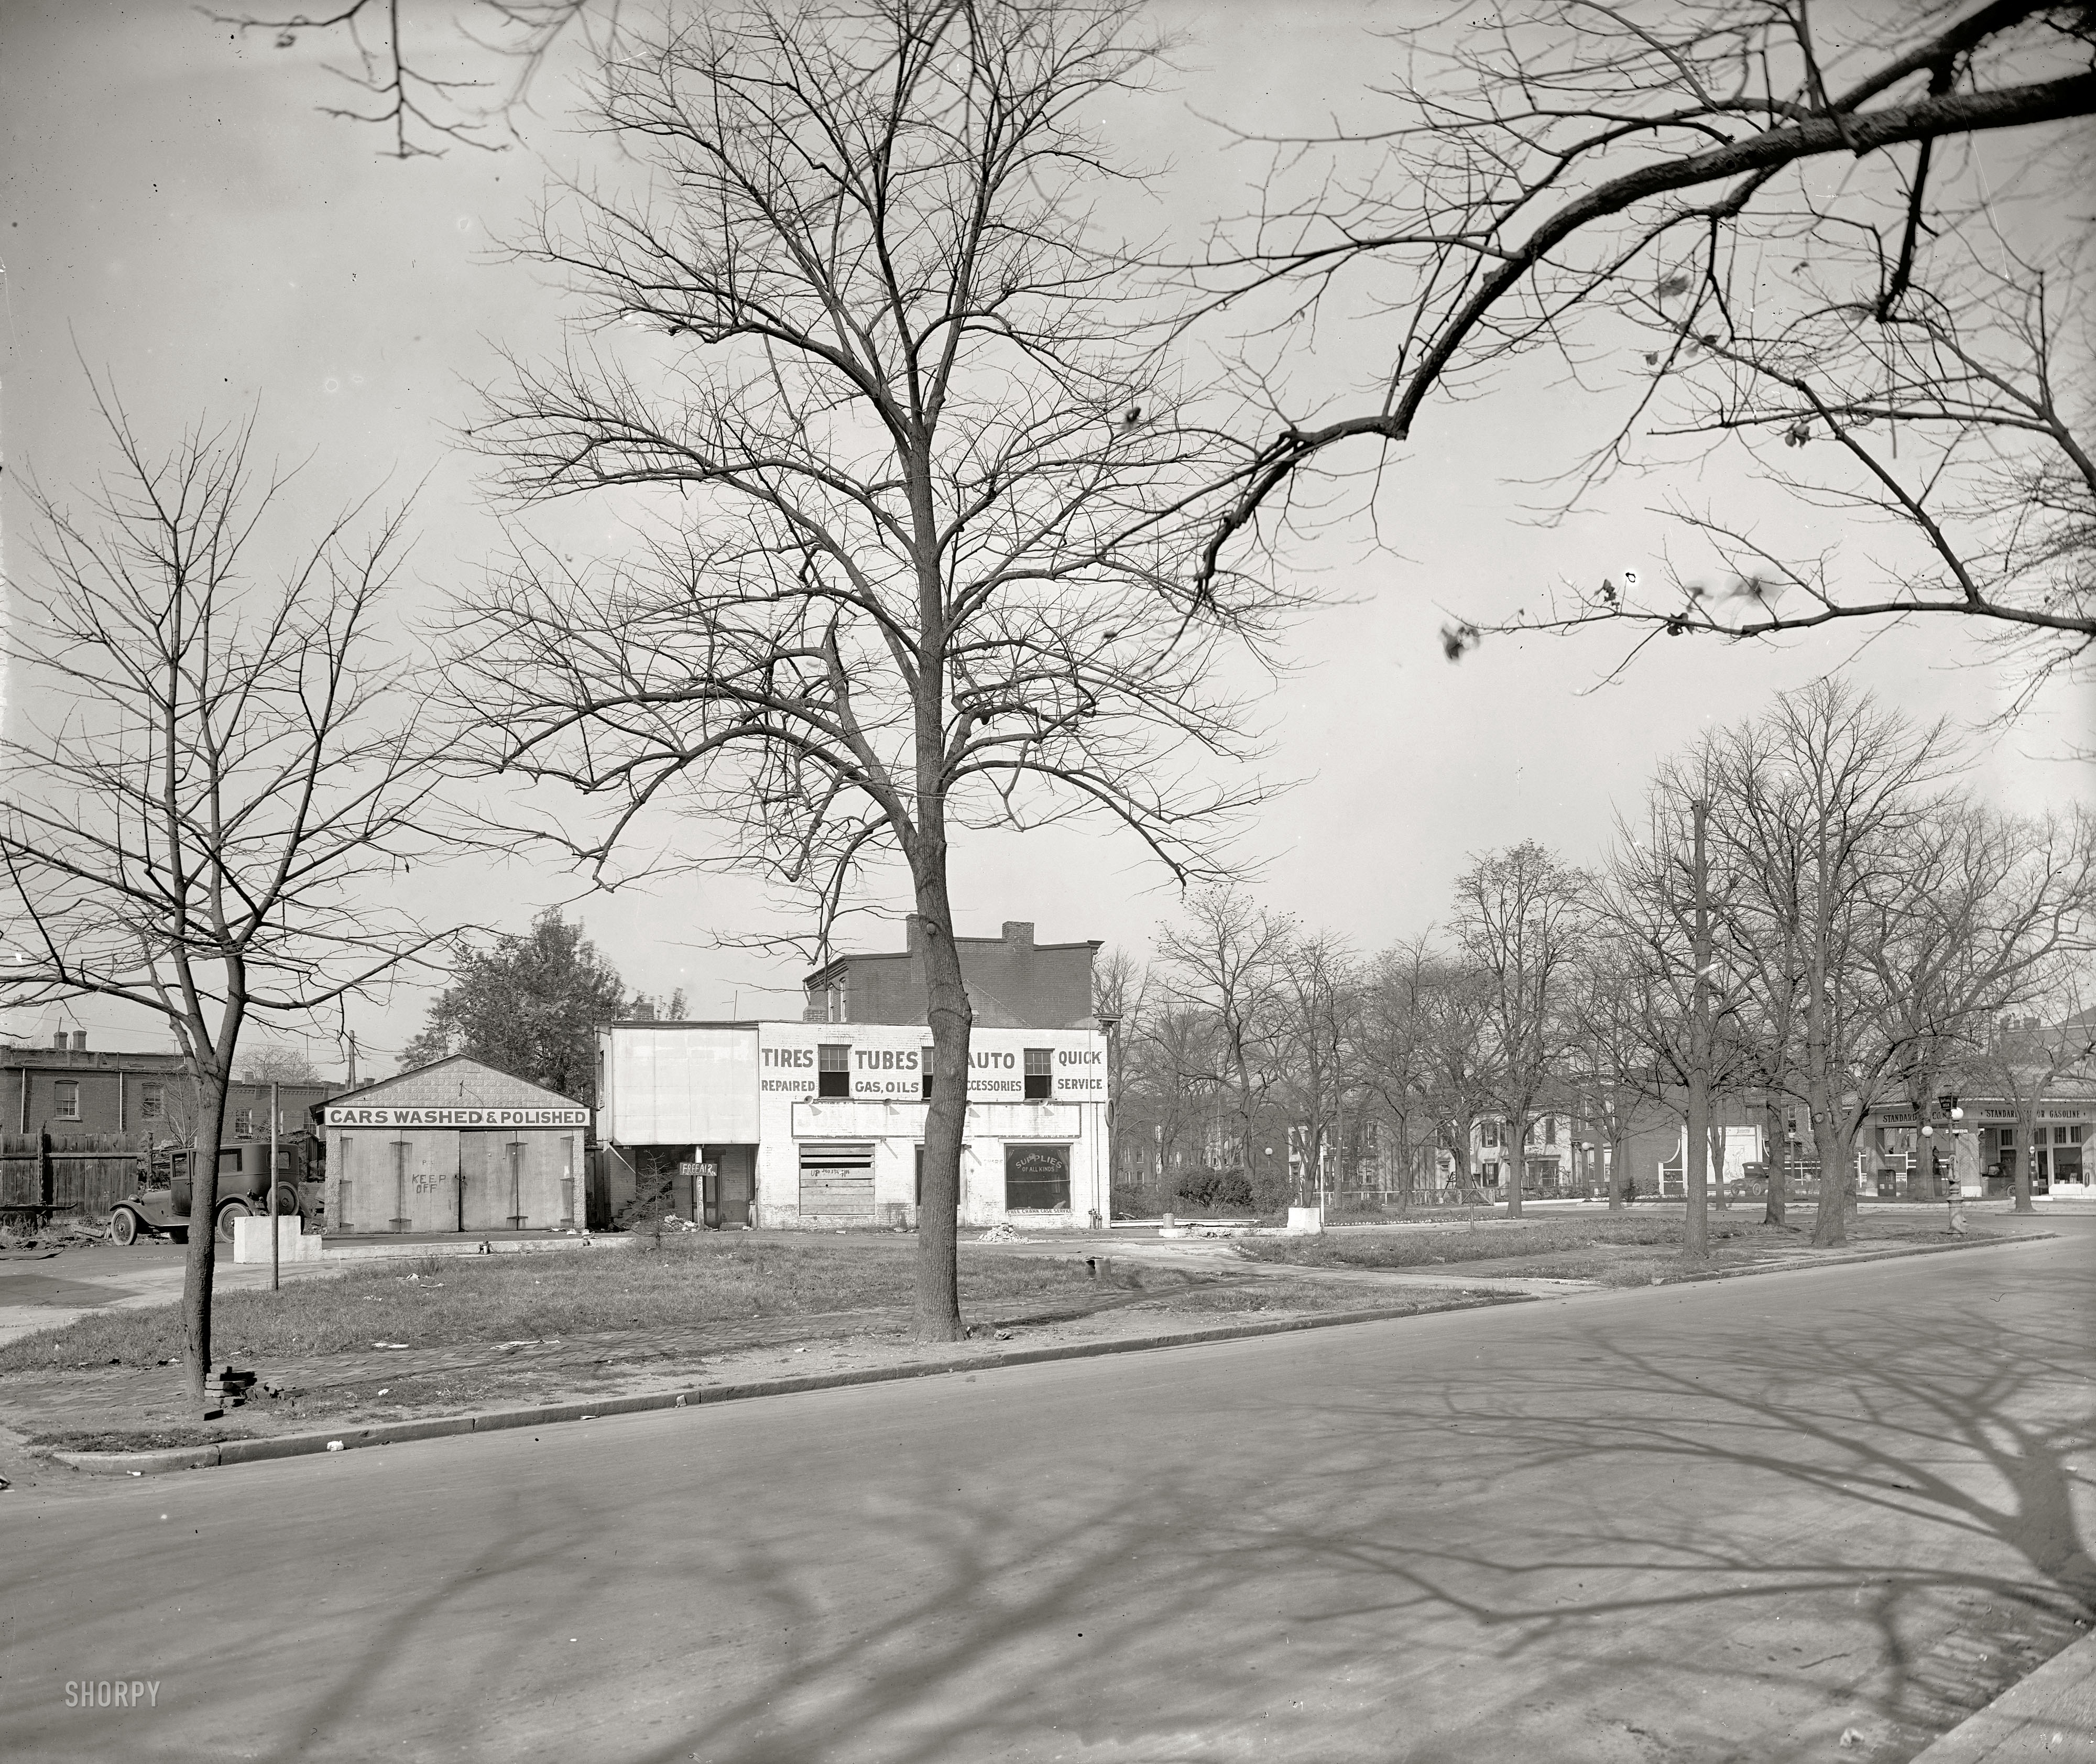 Washington, D.C., circa 1925. "Texas Co." Another view of the derelict service station at Mass Ave and 2nd Street N.W. National Photo Co. View full size.